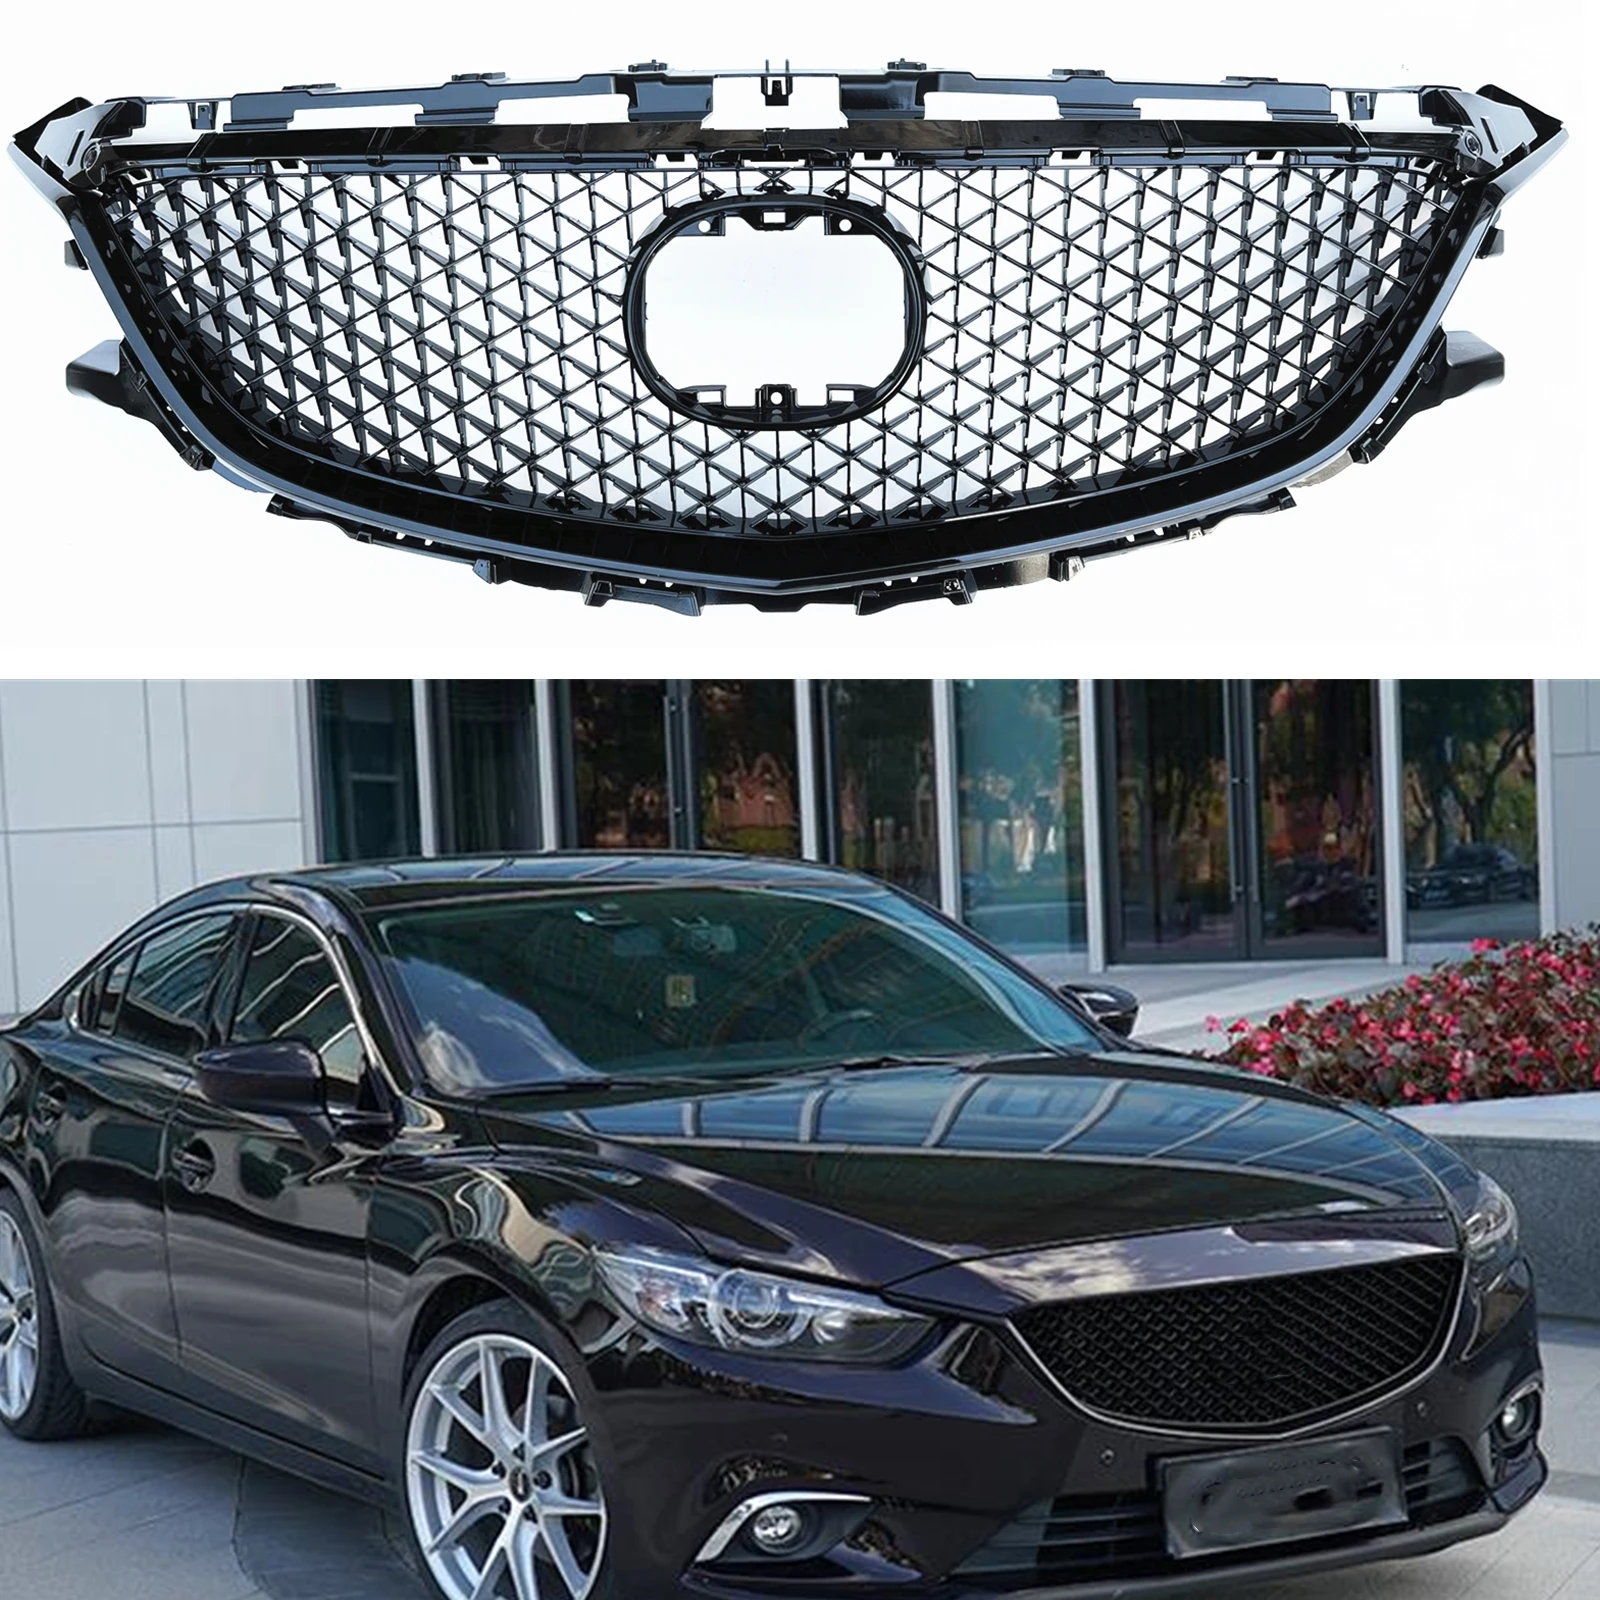 

Honeycomb Style Front Grille Racing Grills For Mazda 6 2014-2016 Mazda6 Black Replacement Upper Bumper Hood Mesh Body Kit Grid